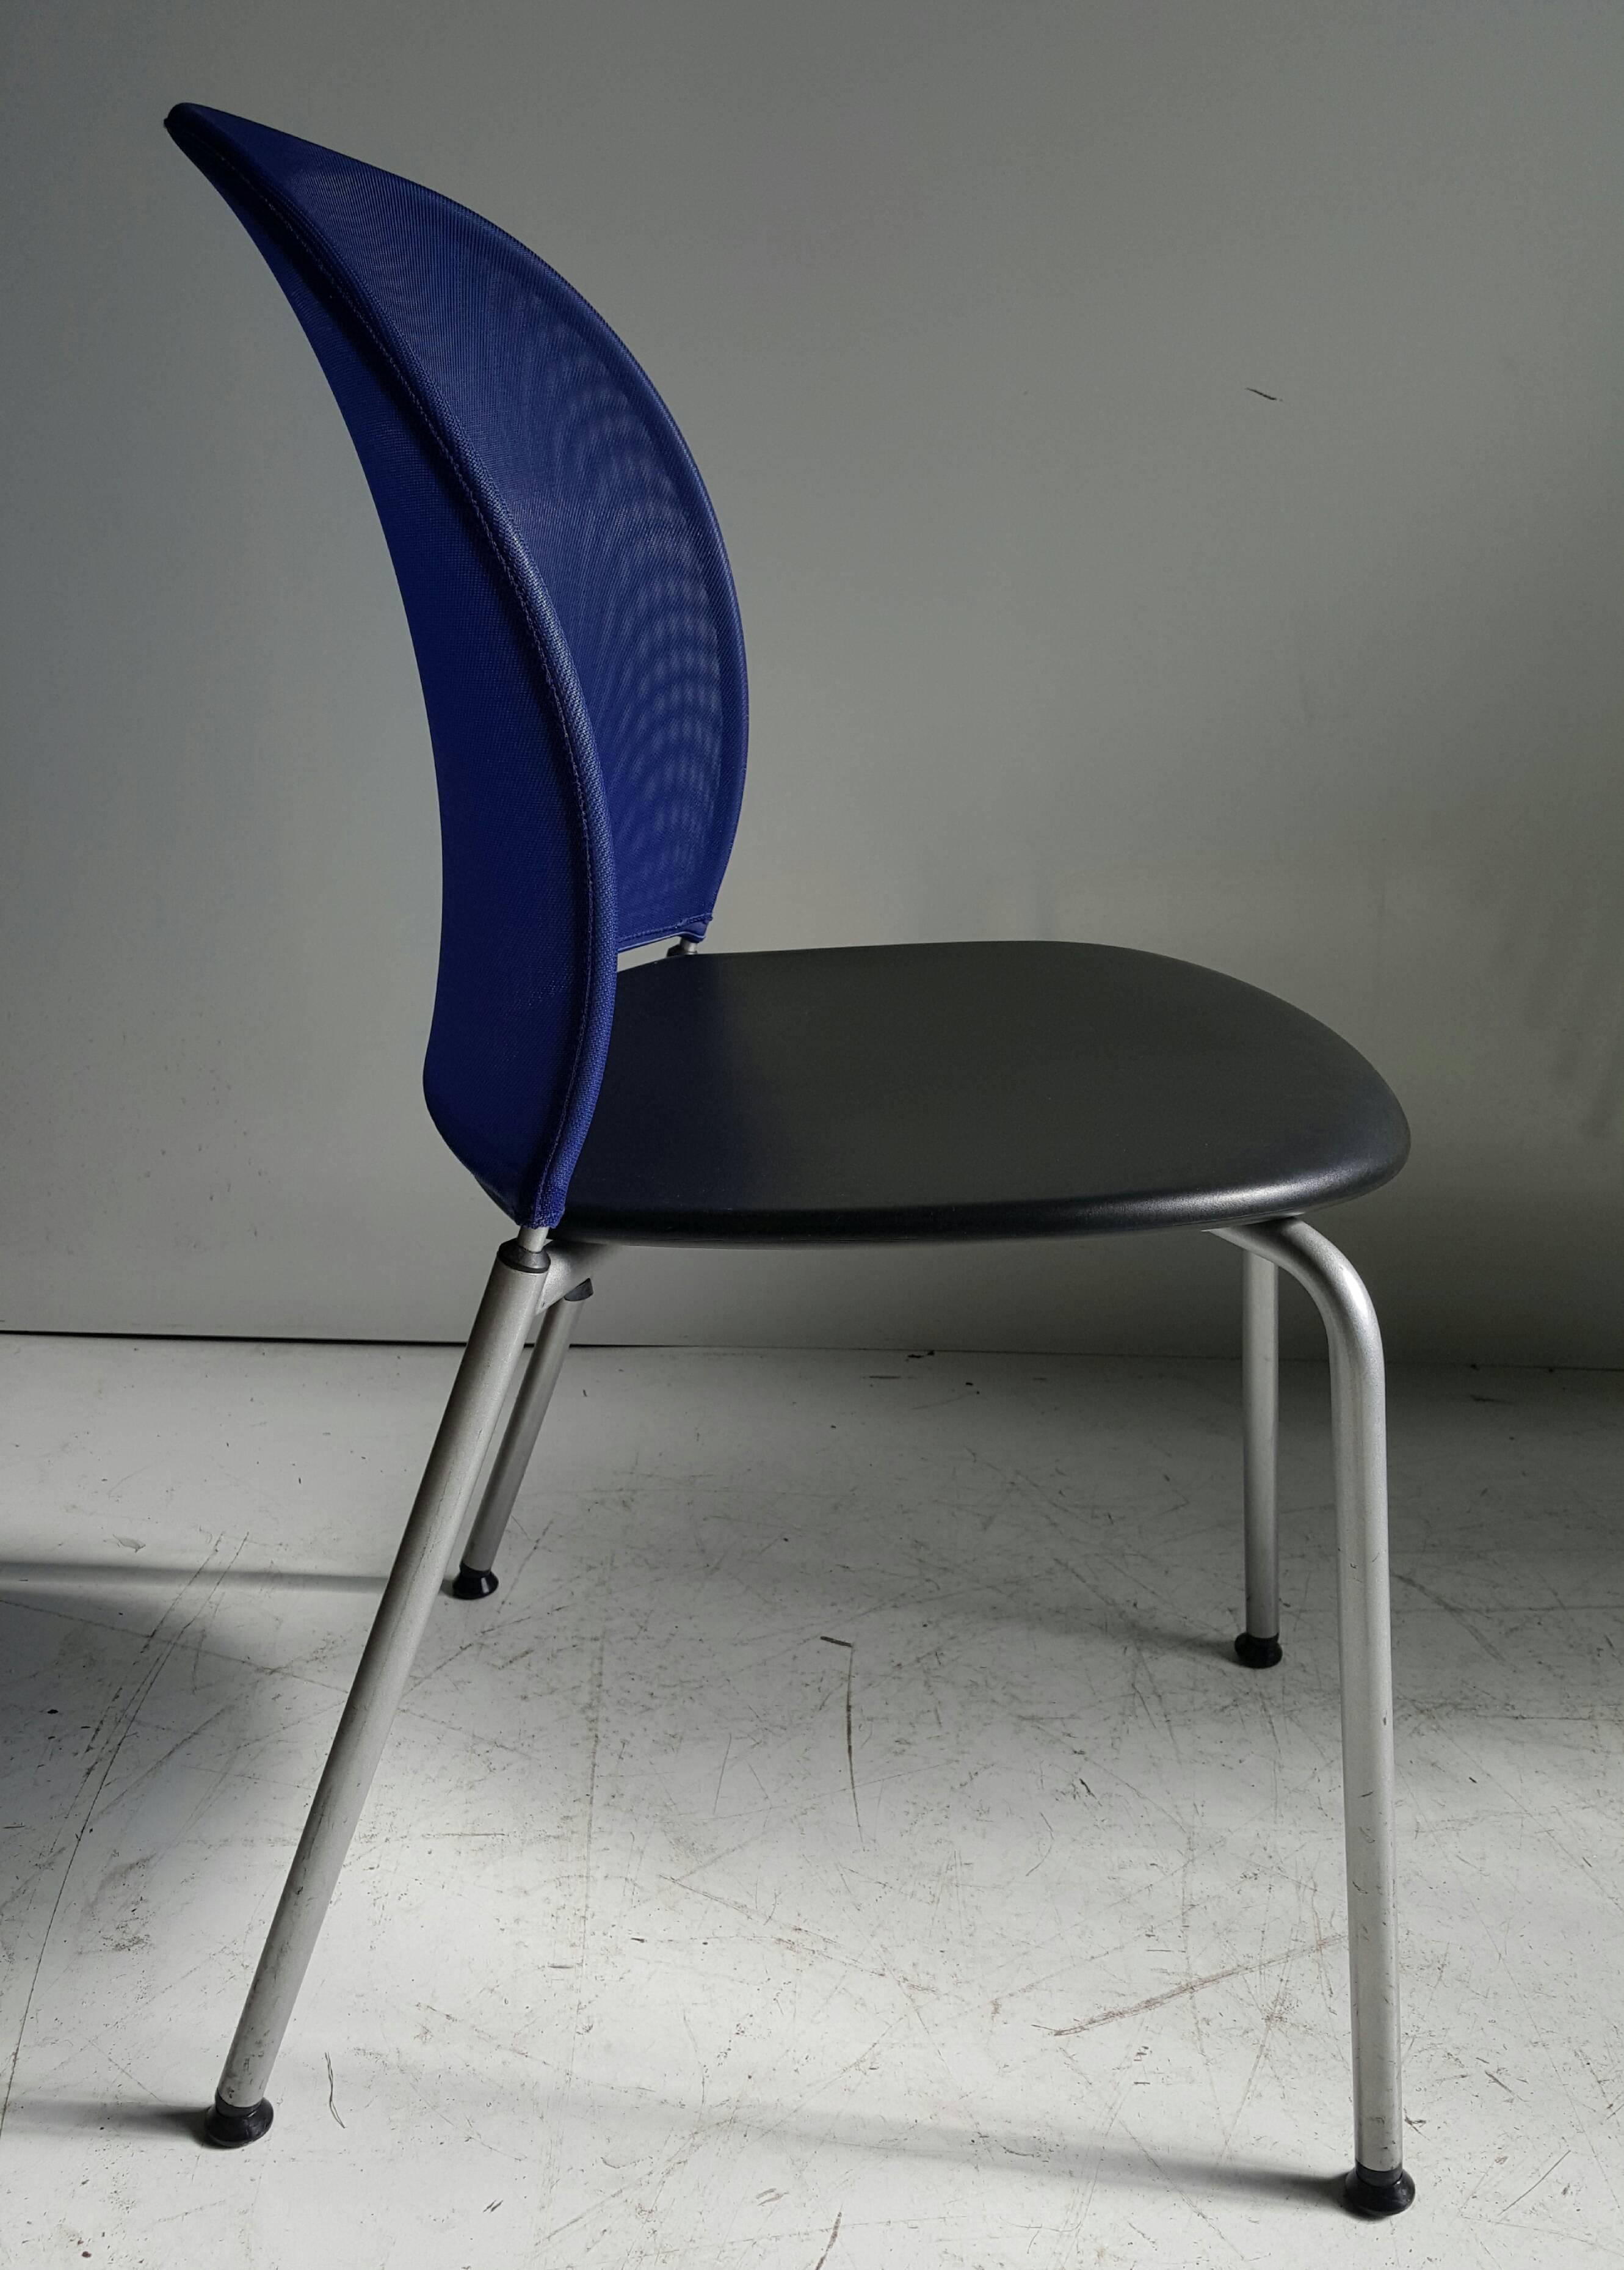 Dietiker chairs.

Orta chair.
The special thing about Orta is the optimally shaped, elastic back with the textile cover. Features royal blue netting, polymide seat, extremely comfortable, very stylish, stackable option... designed by Christoph